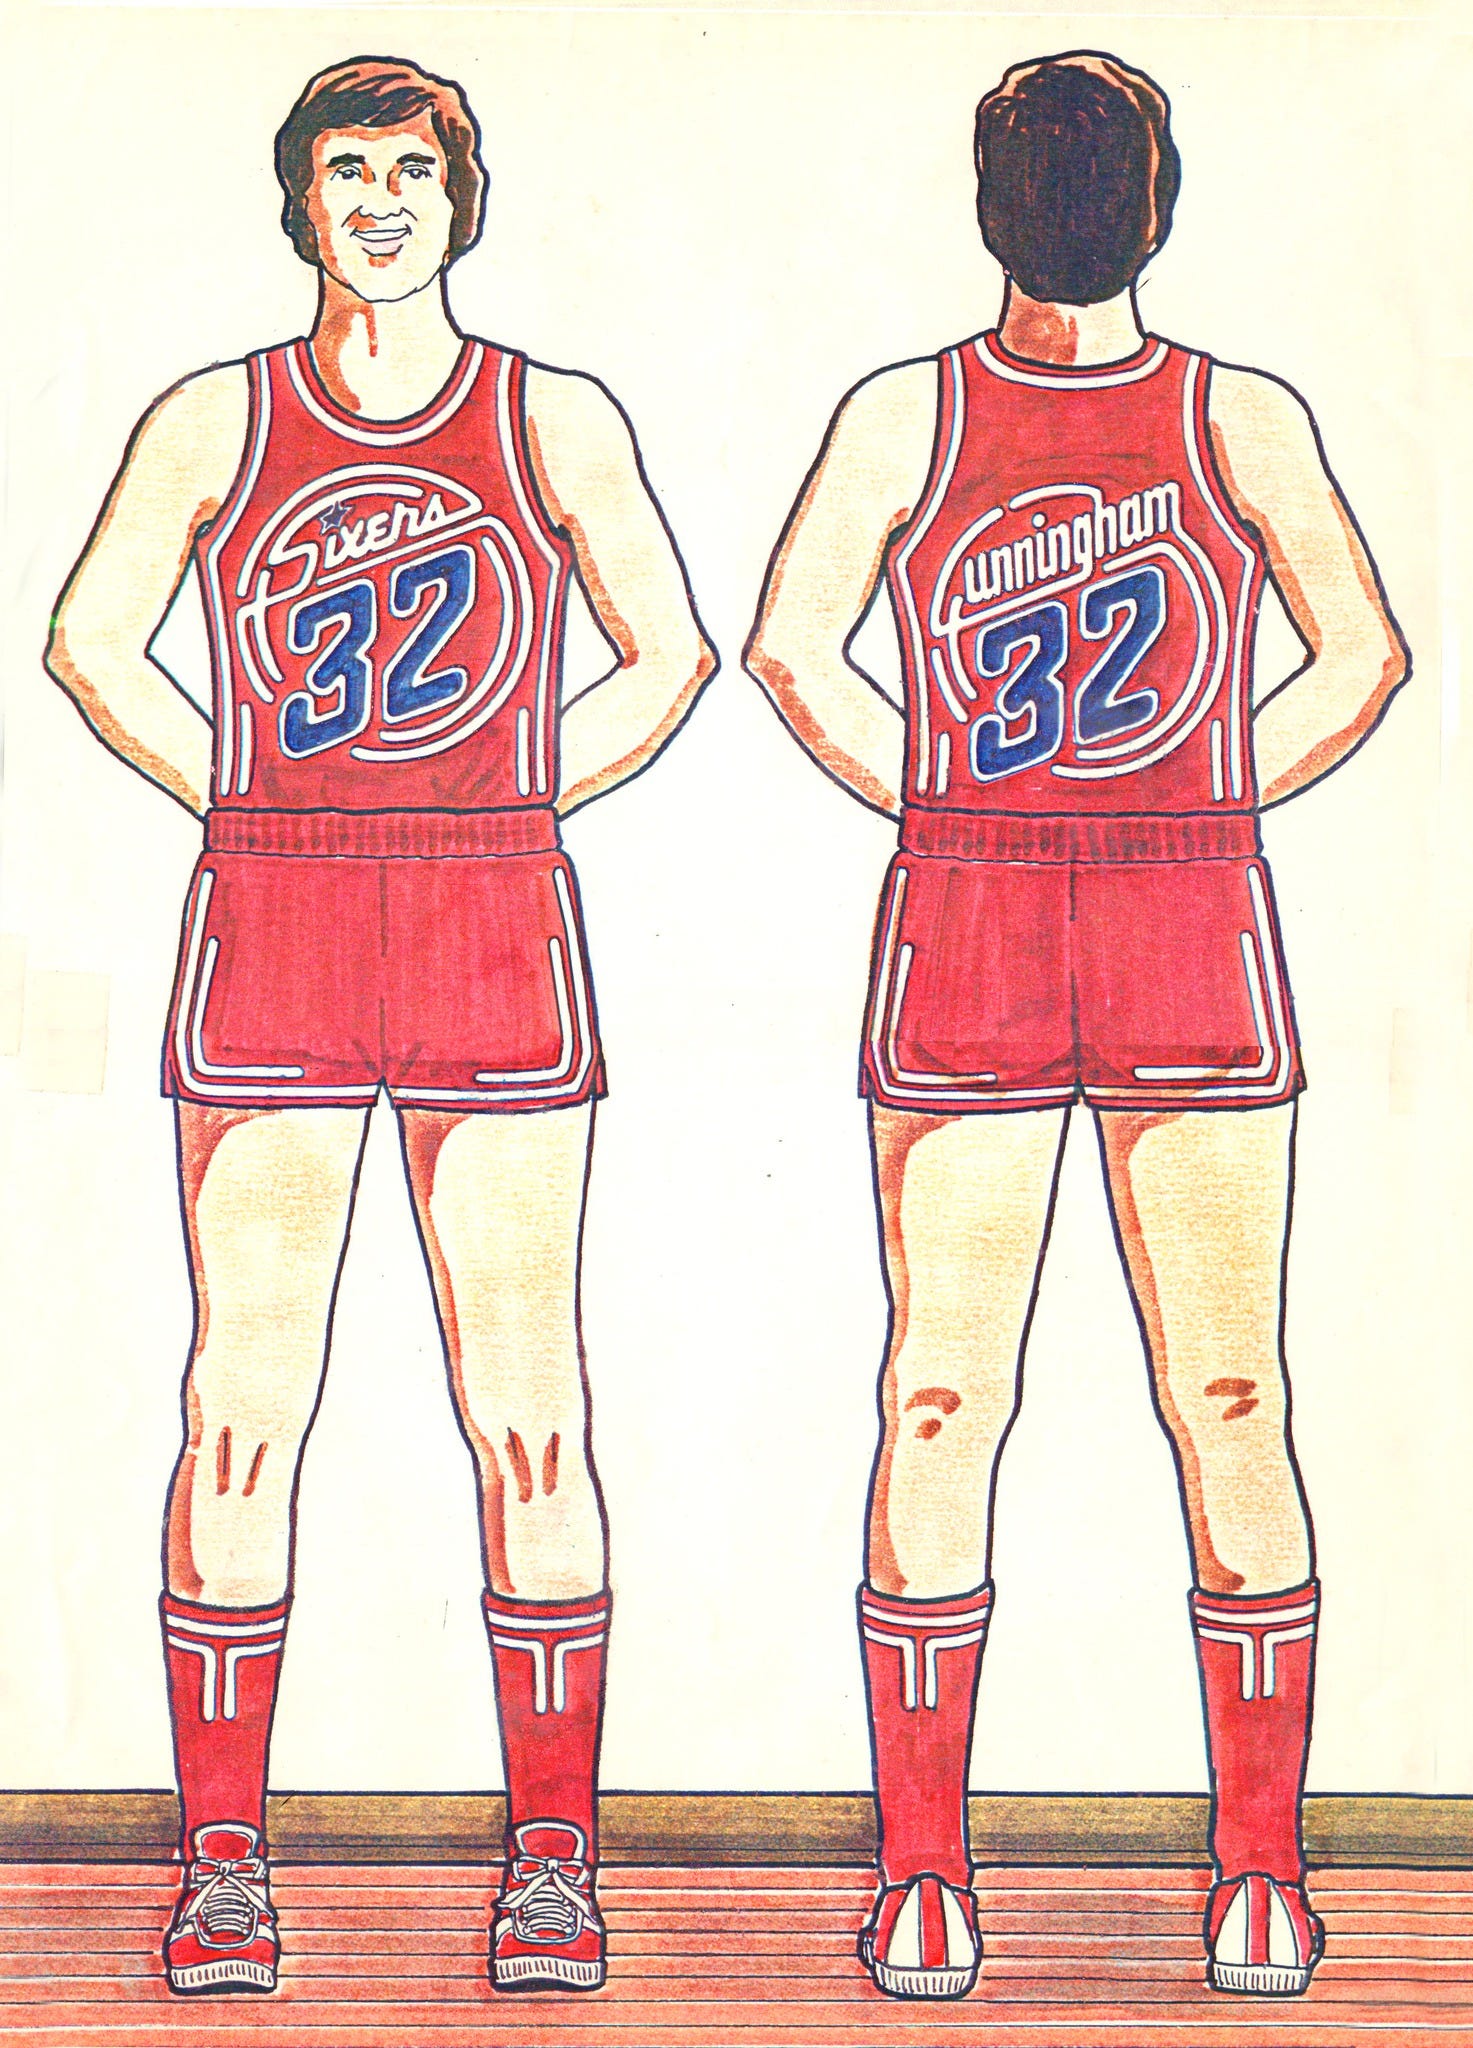 EXCLUSIVE: 76ers Considered Black-Light Uniform in Early '80s